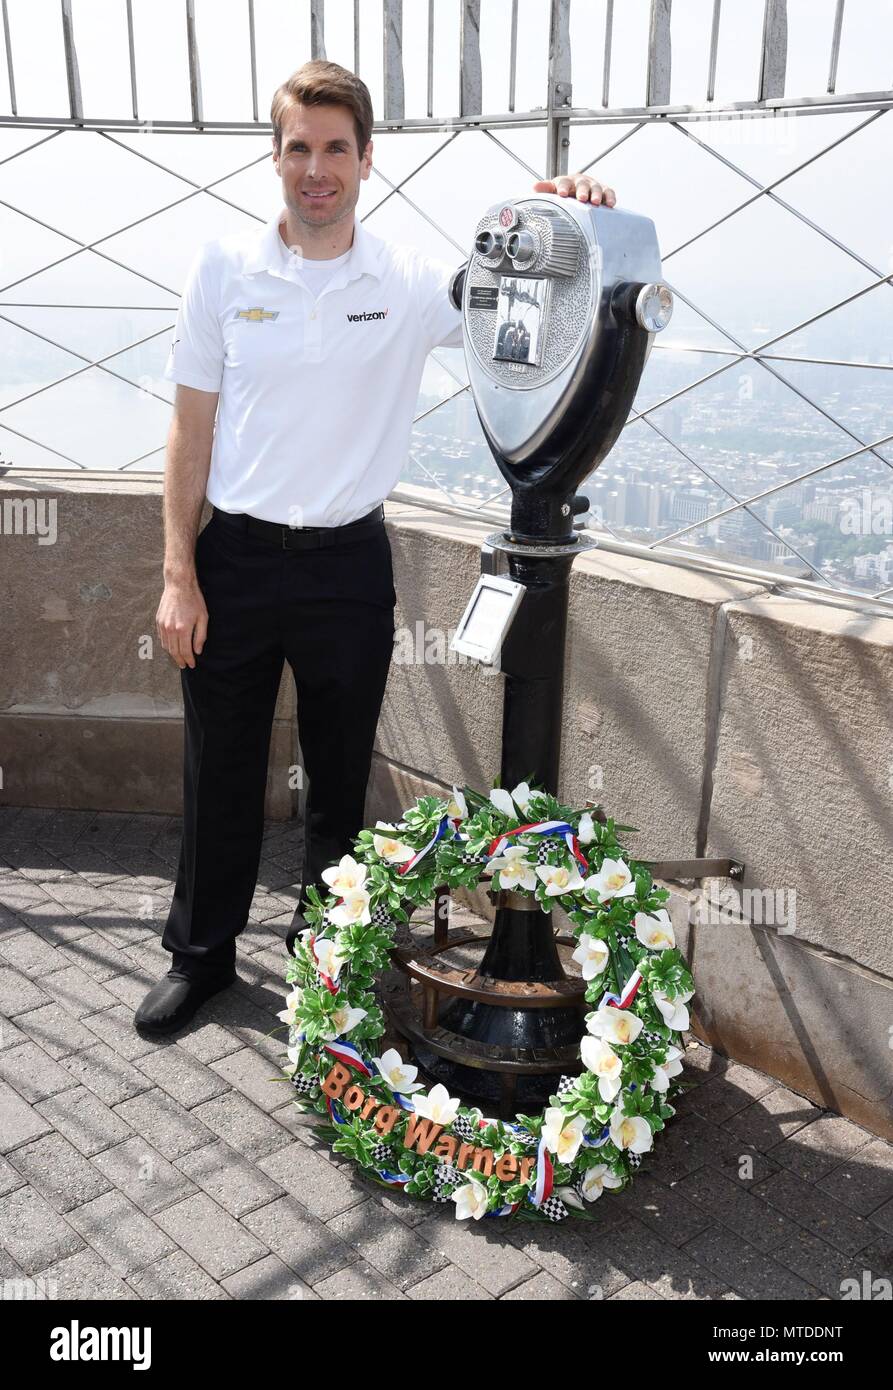 New York, NY, USA. 29th May, 2018. Will Power at a public appearance for Indy 500 Winner Will Power Visits Empire State Building, The Empire State Building, New York, NY May 29, 2018. Credit: Derek Storm/Everett Collection/Alamy Live News Stock Photo